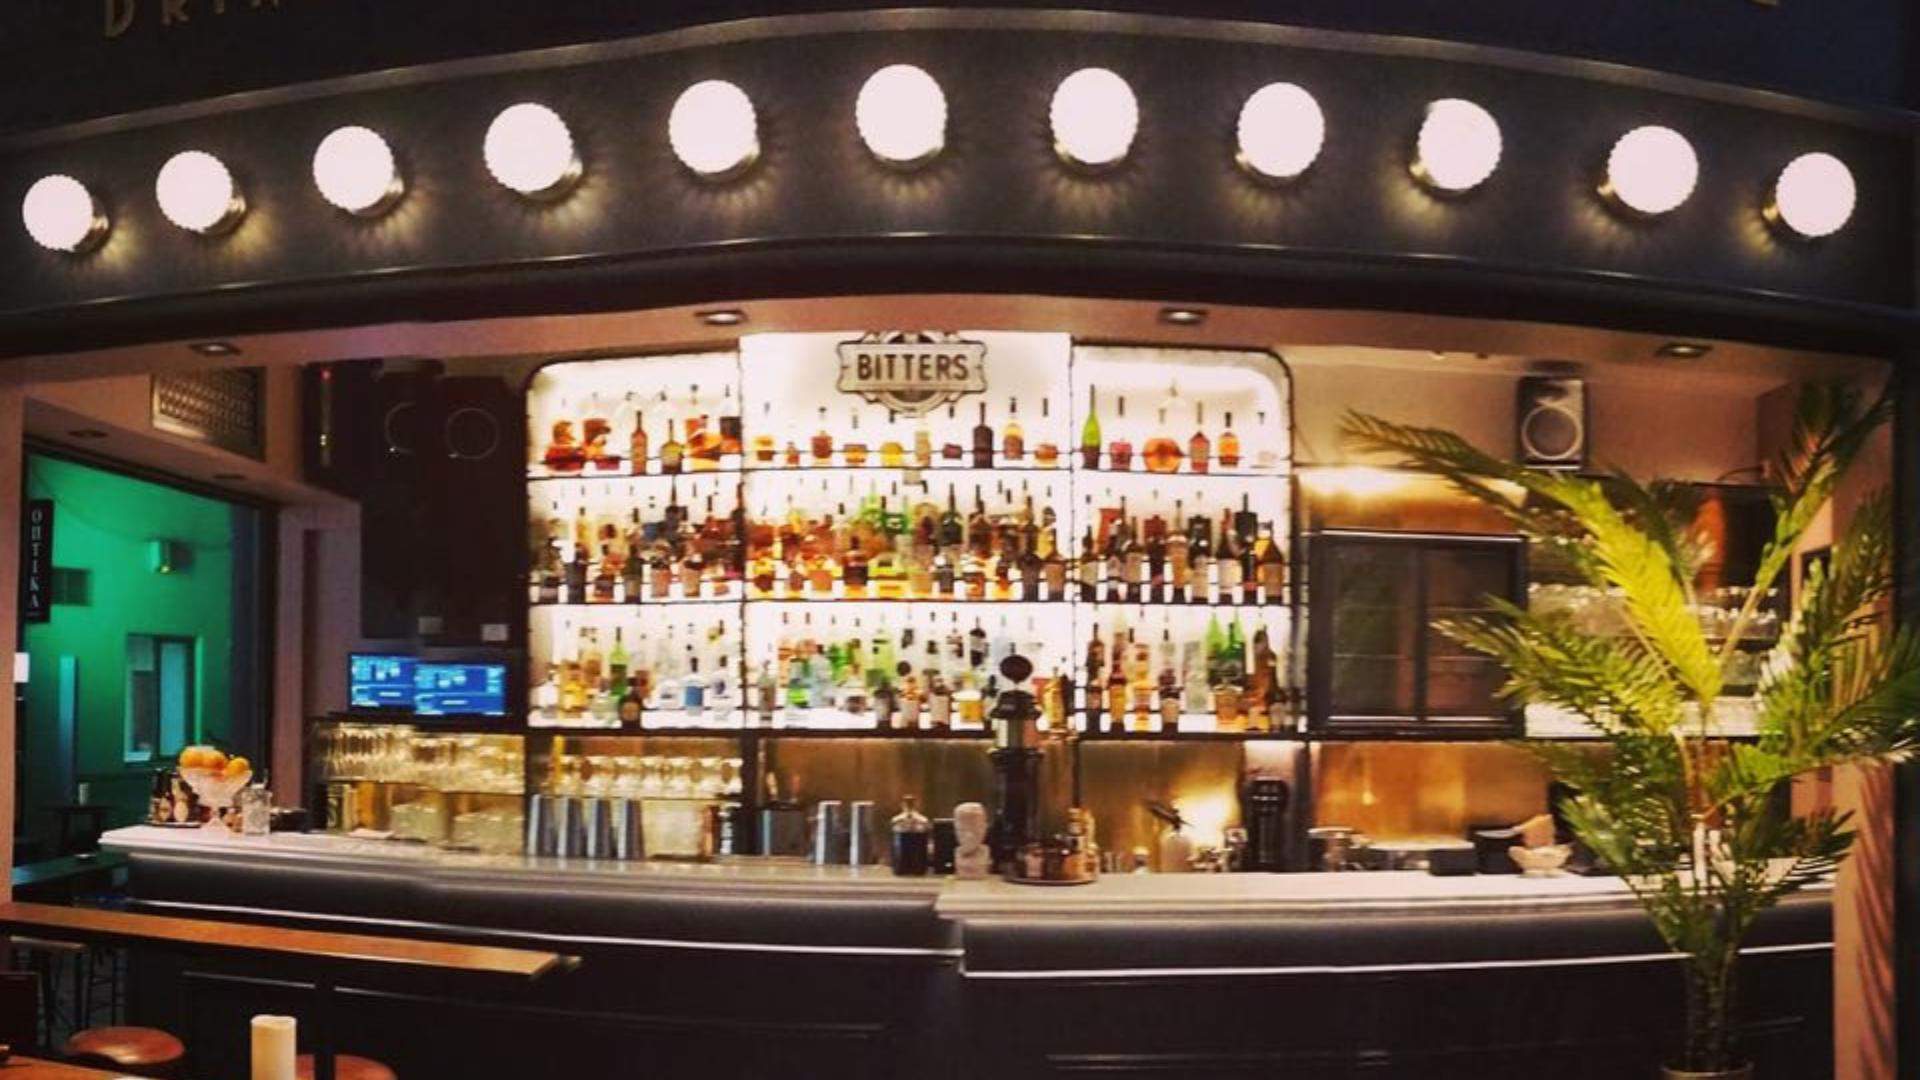 The Bitters Bar